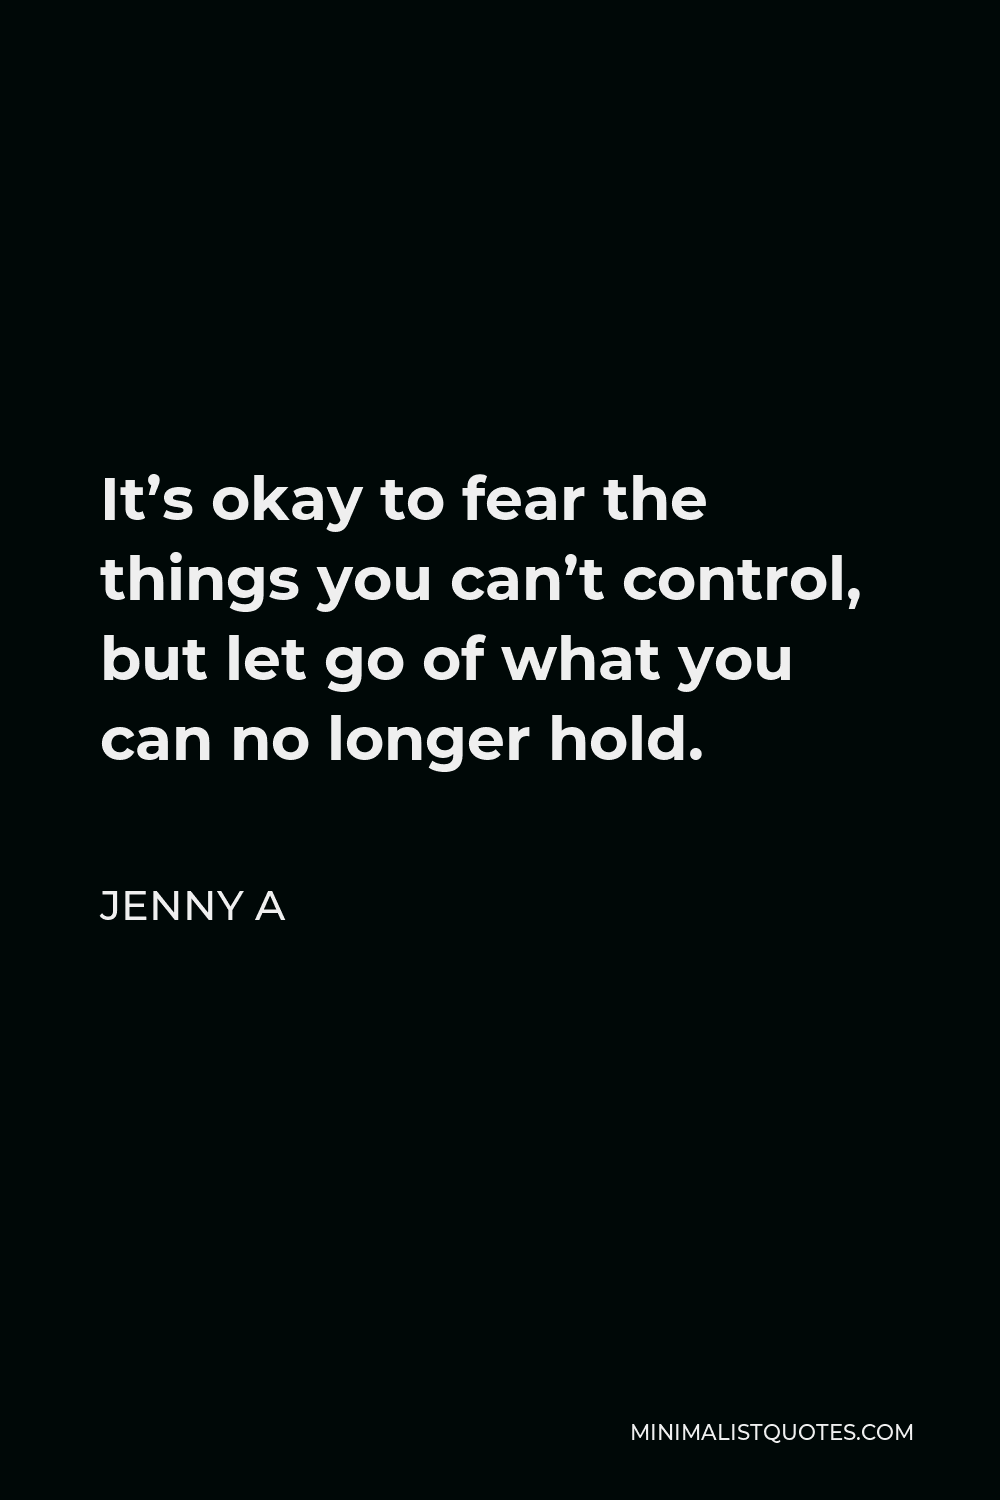 Jenny A Quote - It’s okay to fear the things you can’t control, but let go of what you can no longer hold.